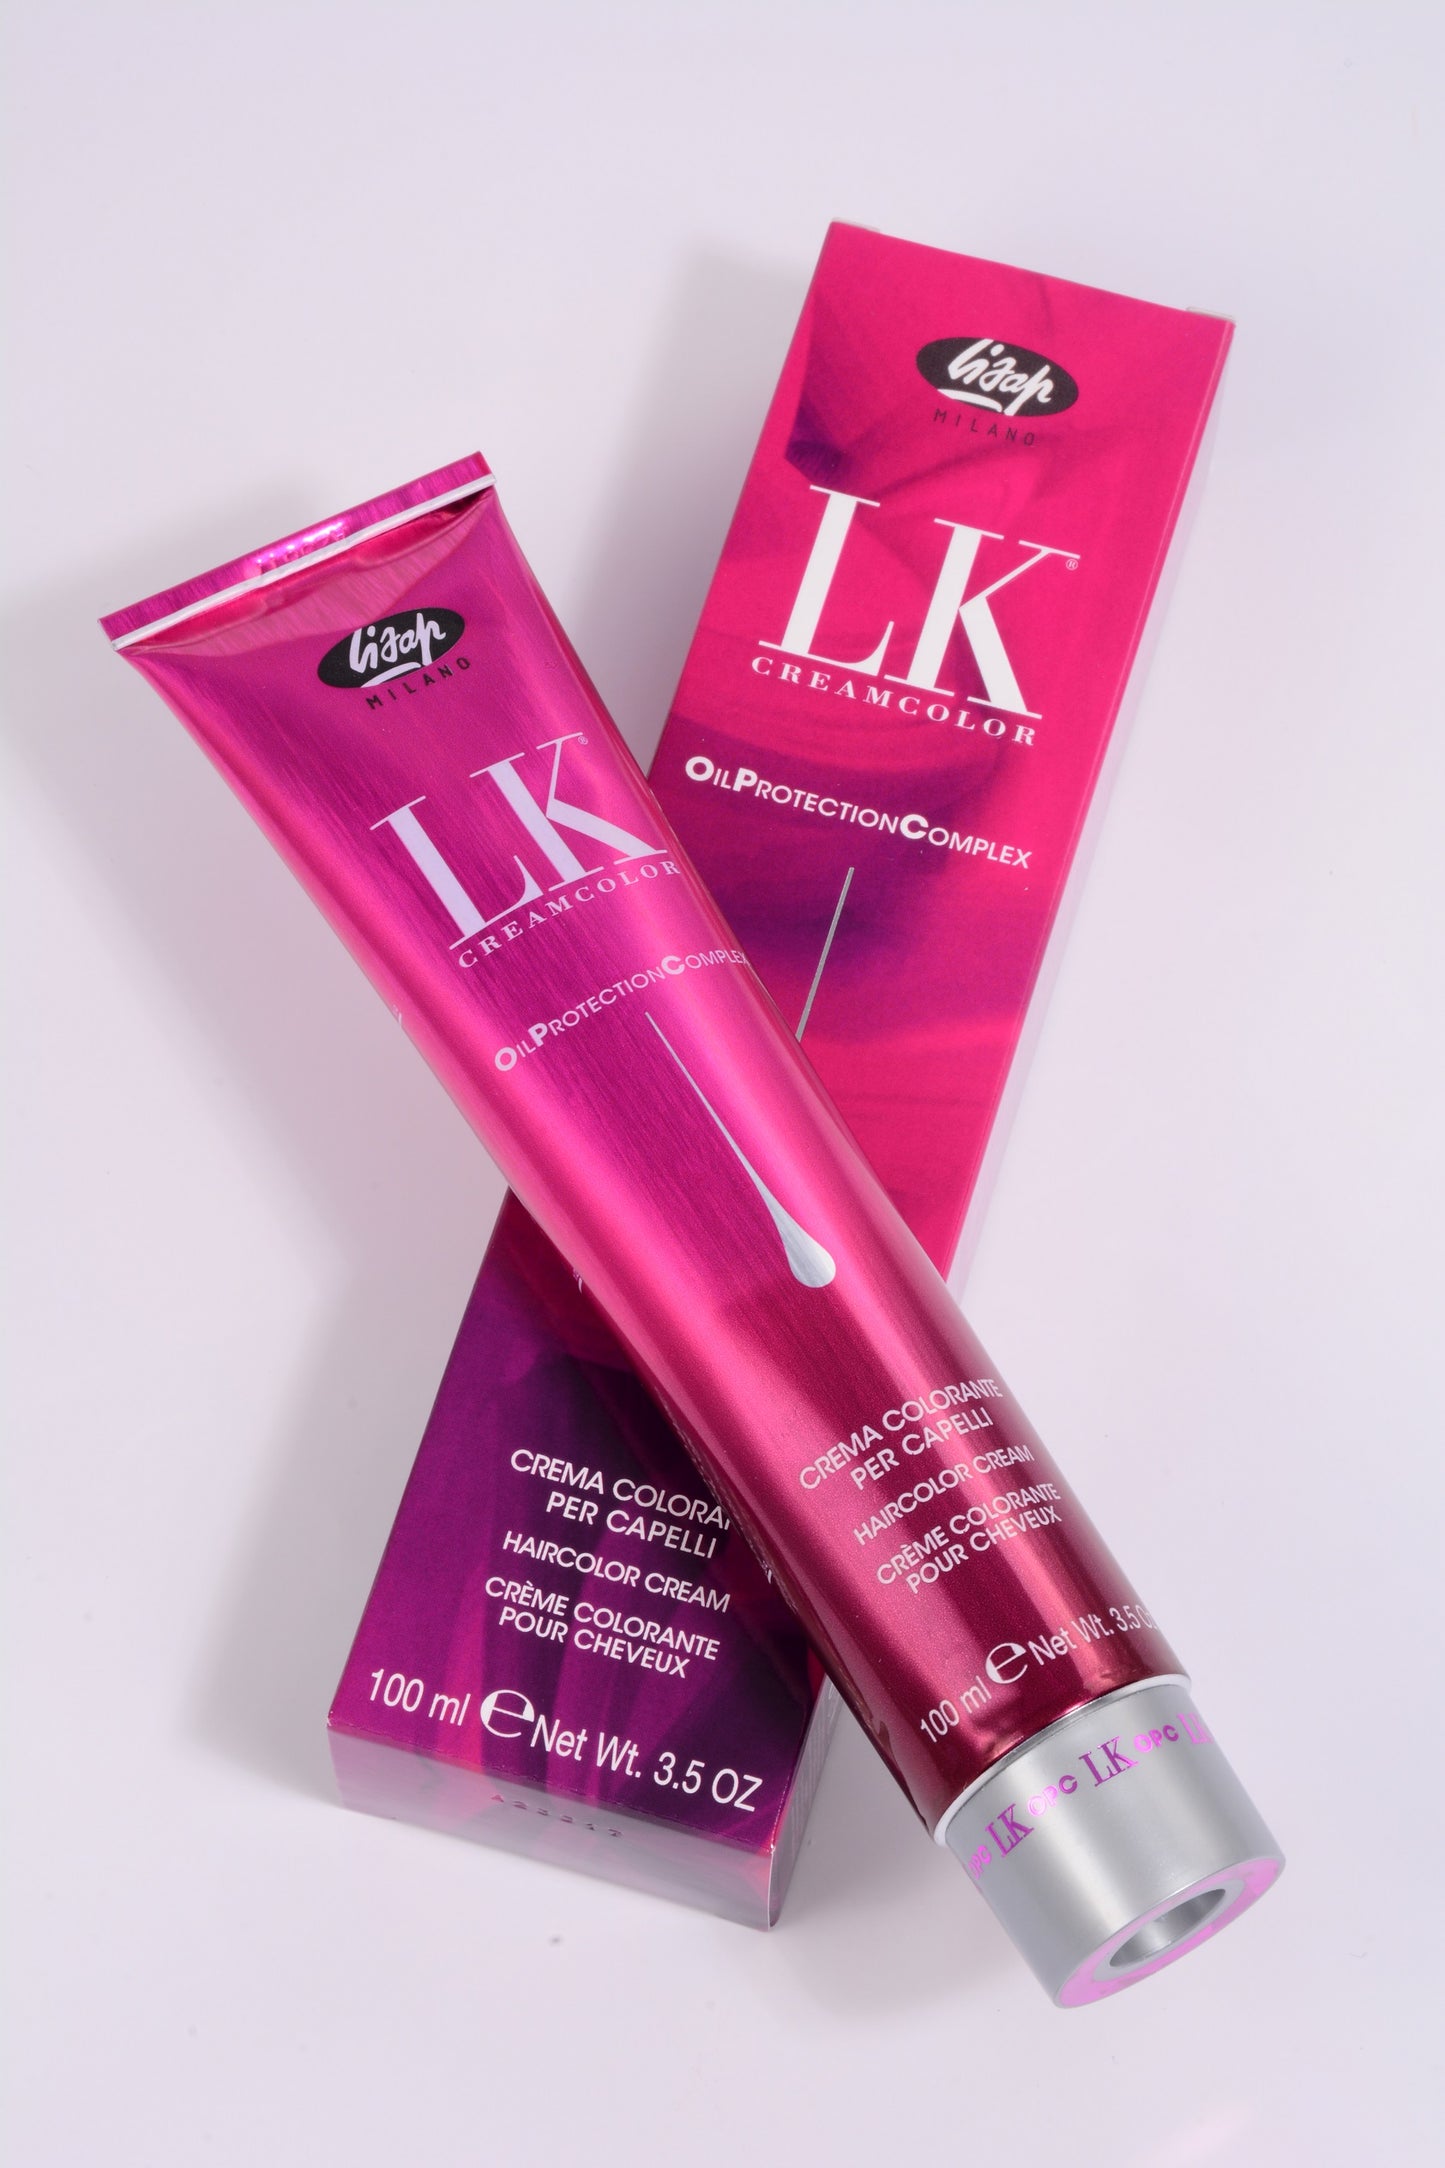 LK Creamcolor 7/7 Oil Protection Complex